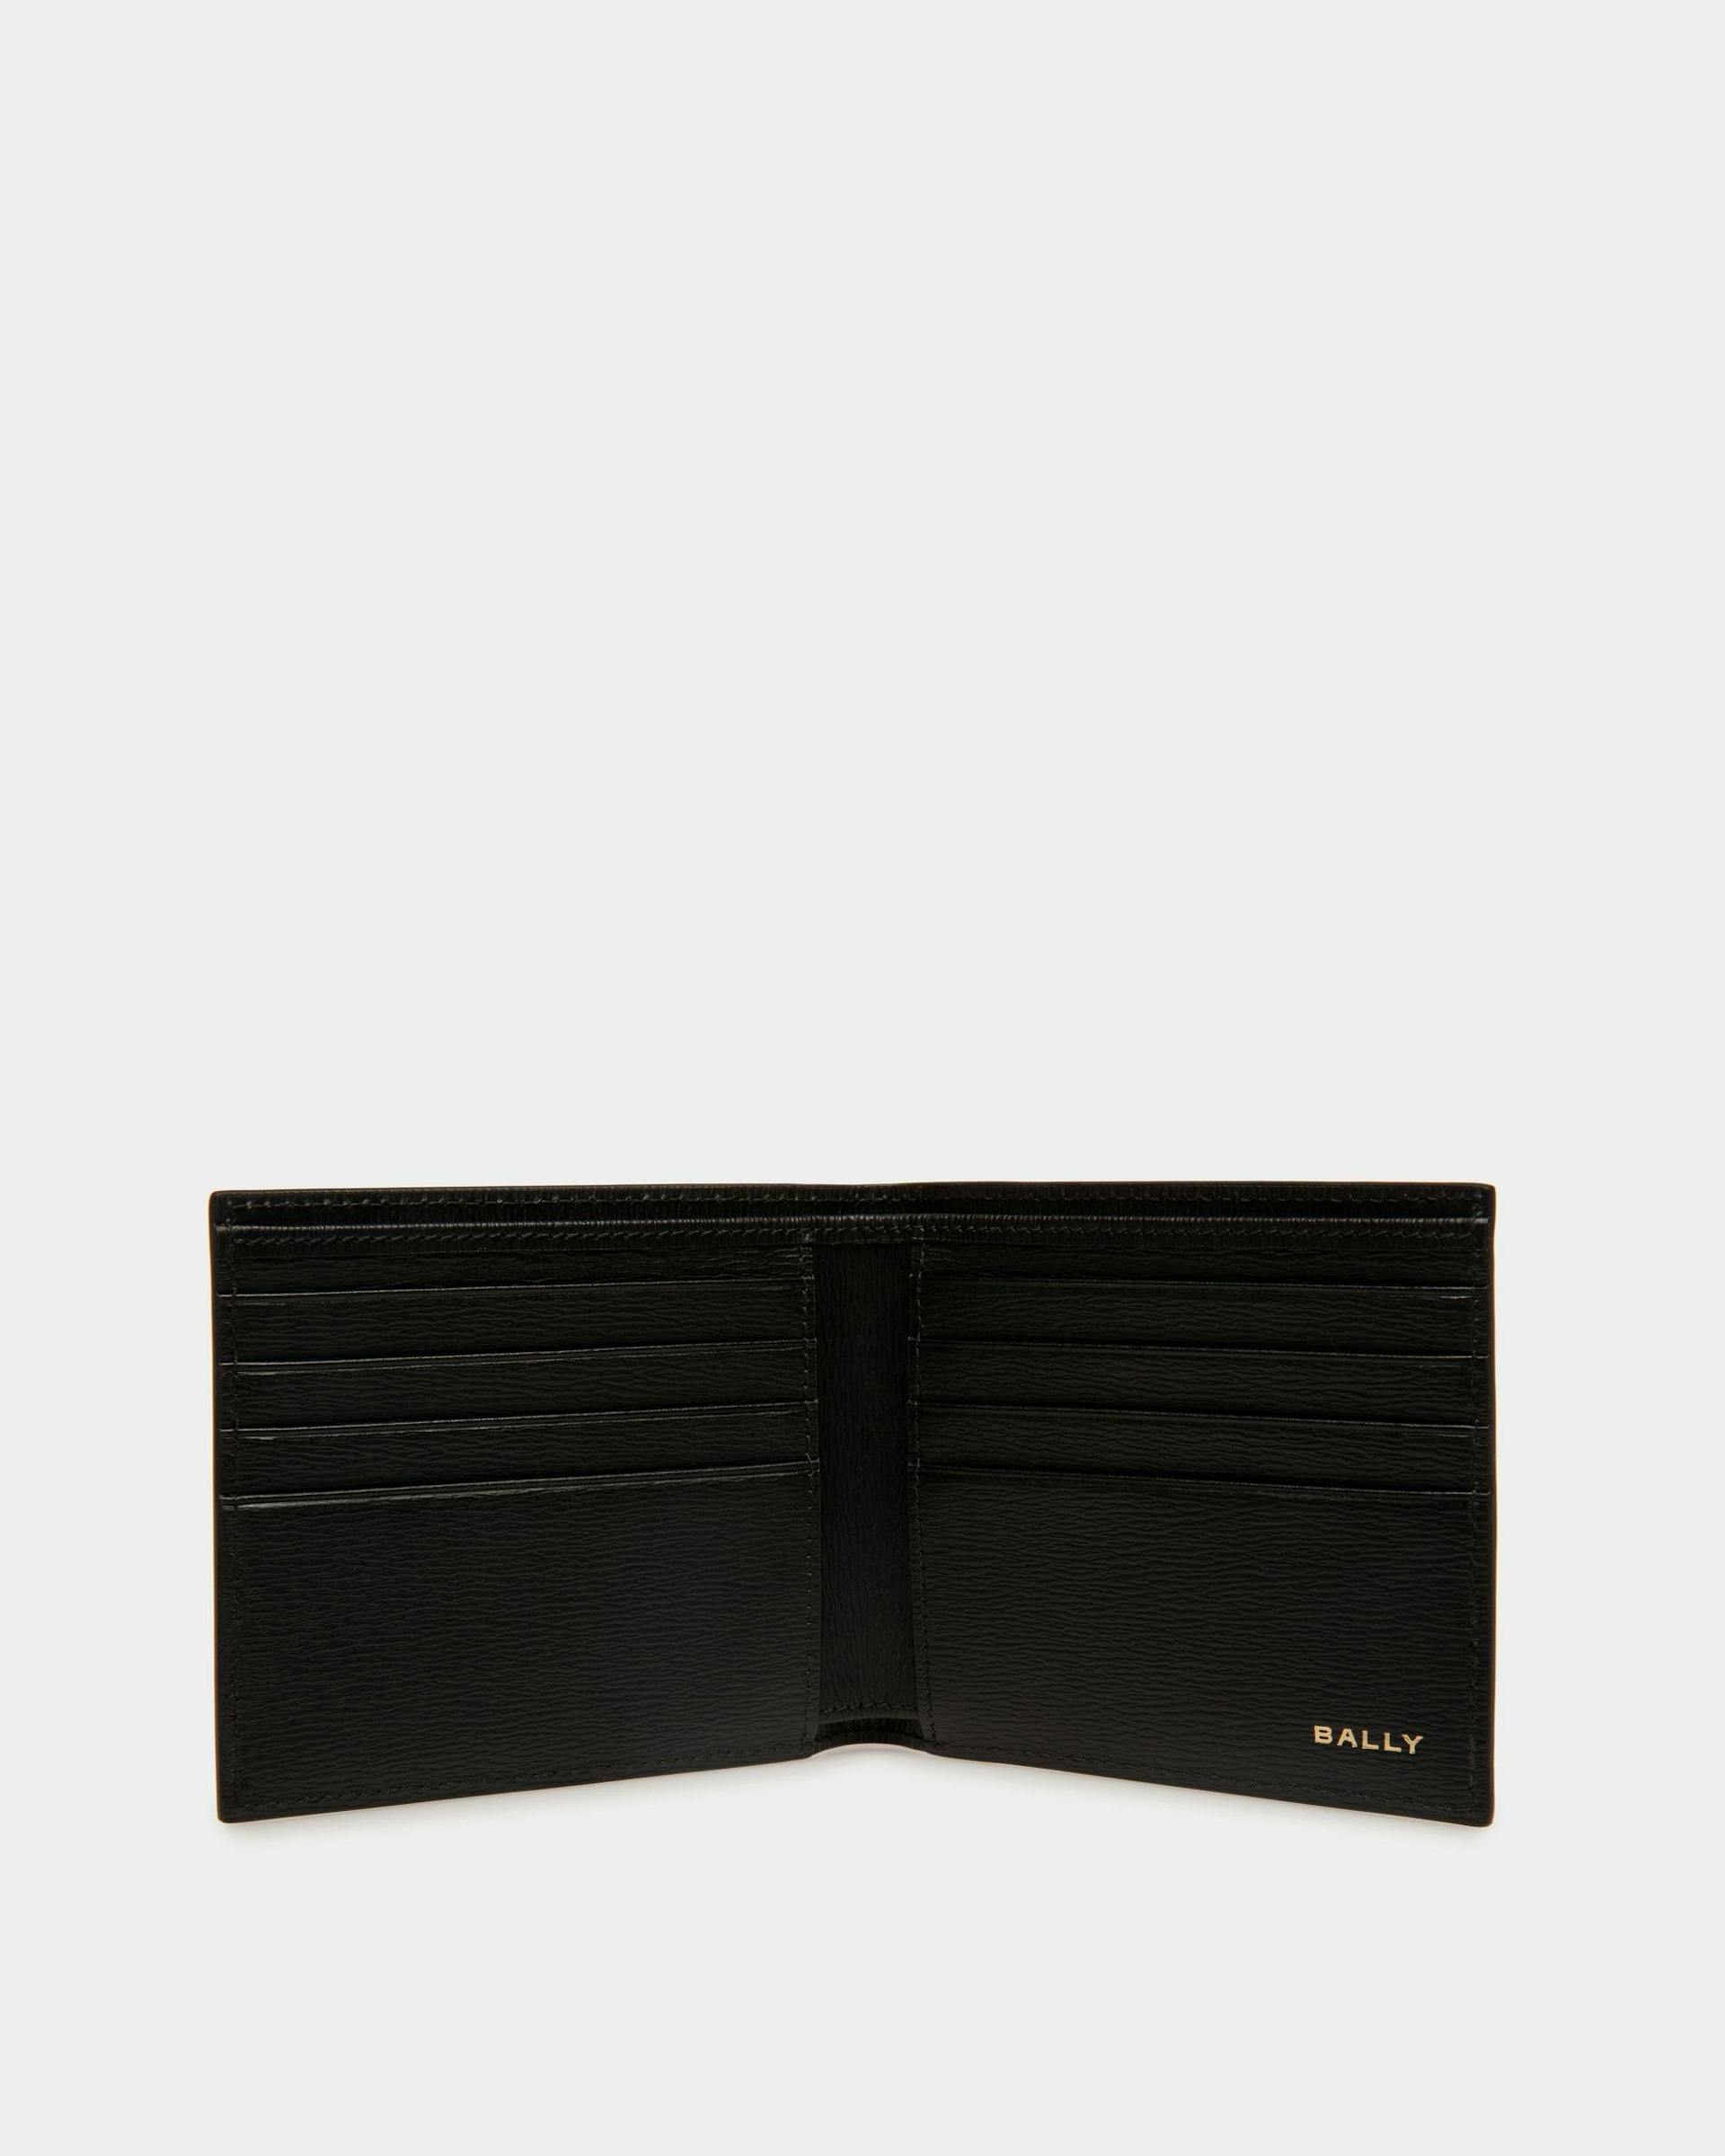 Men's Cny Bifold Wallet In Black And Red Grained Leather | Bally | Still Life Open / Inside